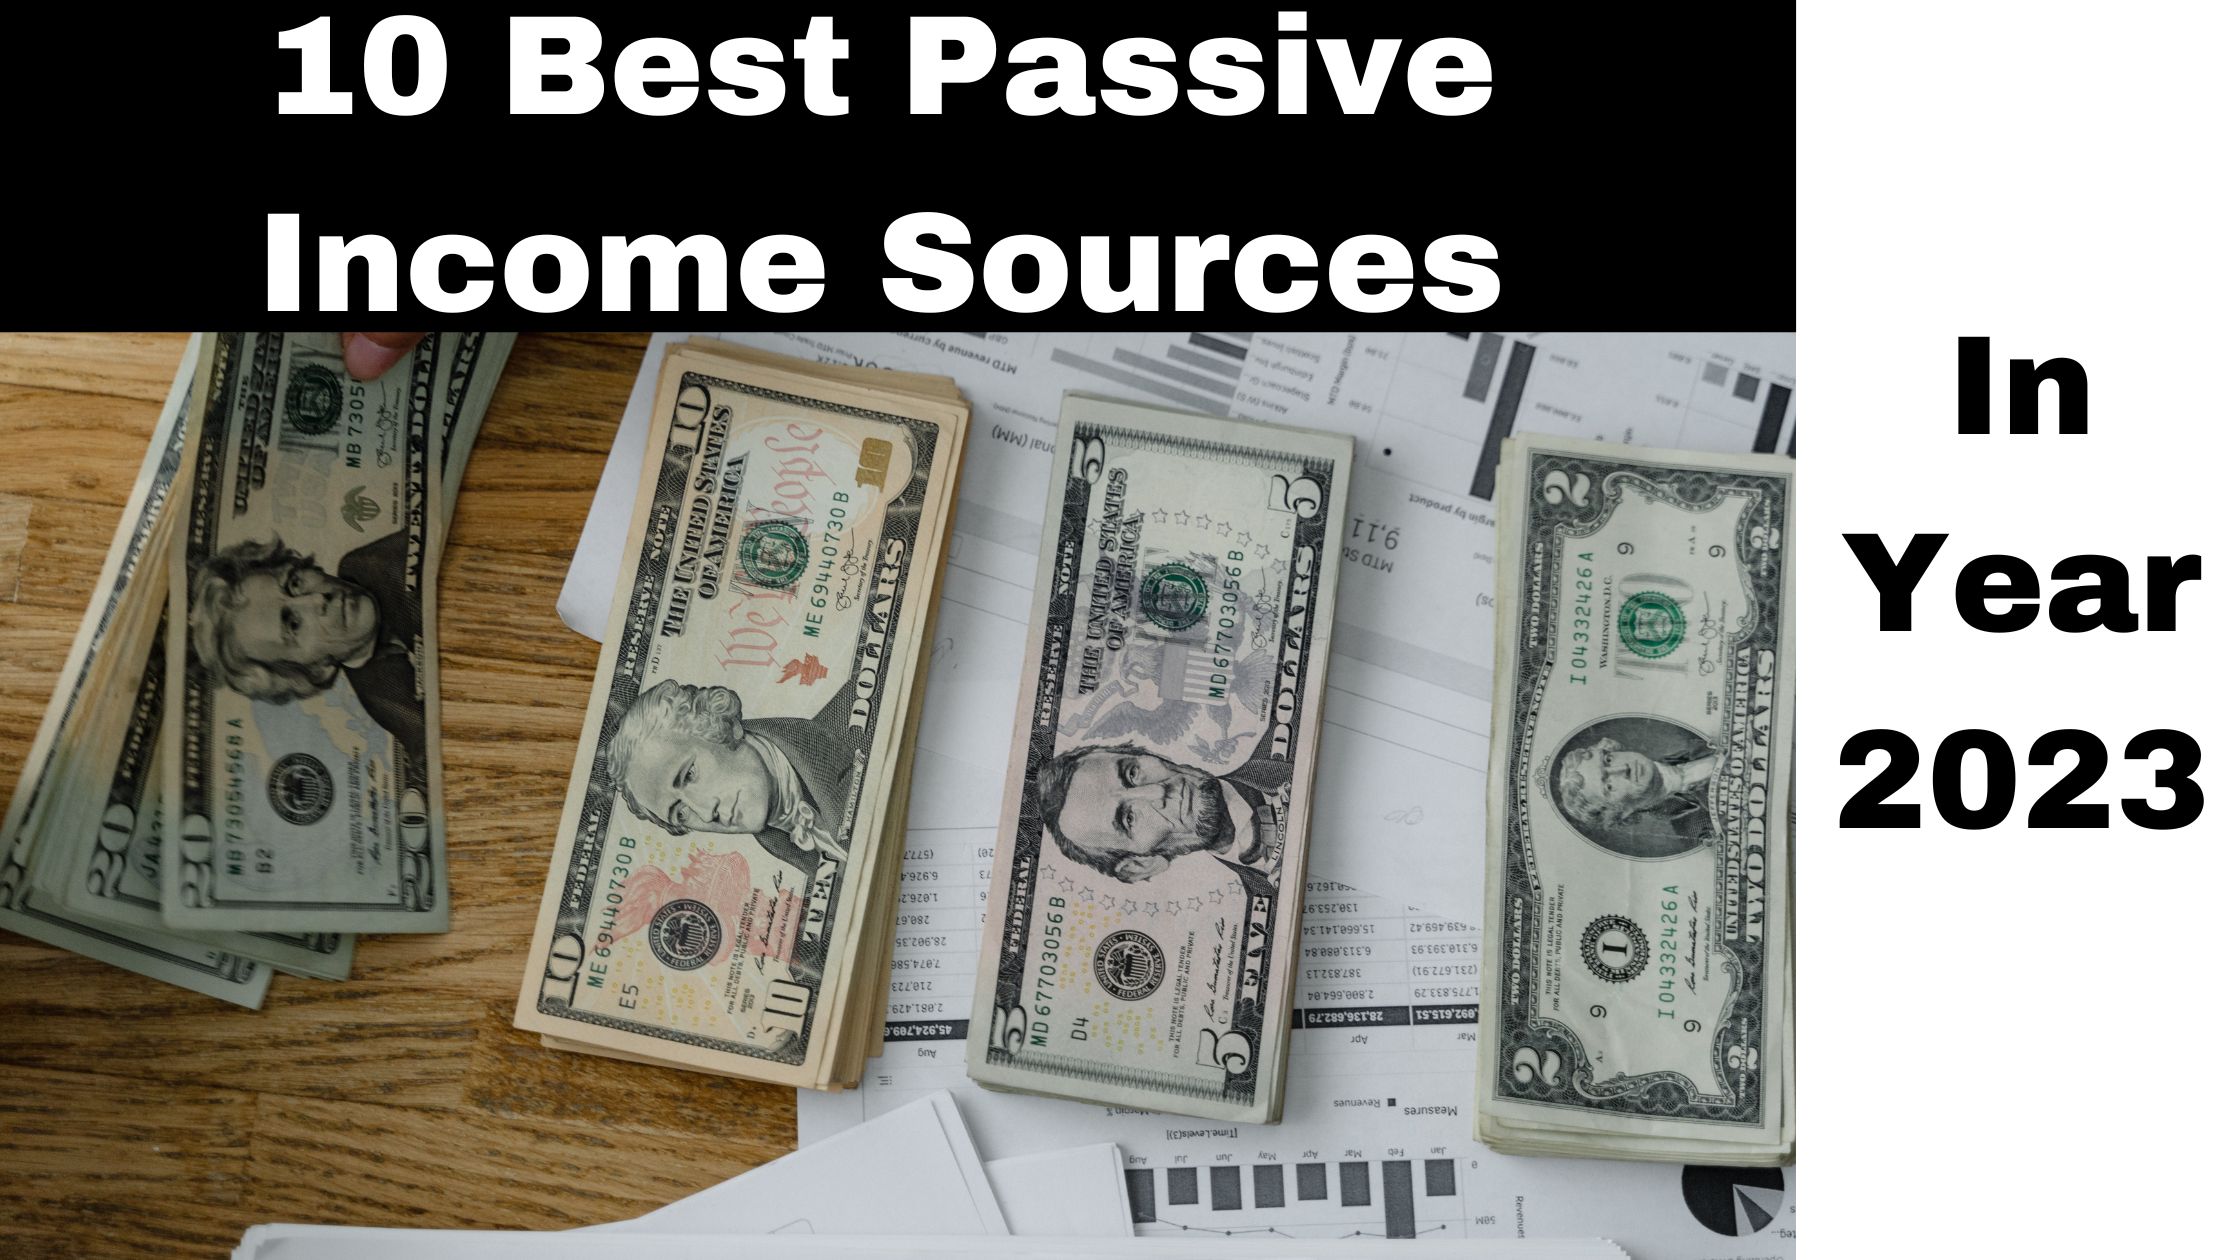 10 best passive income sources in year 2023